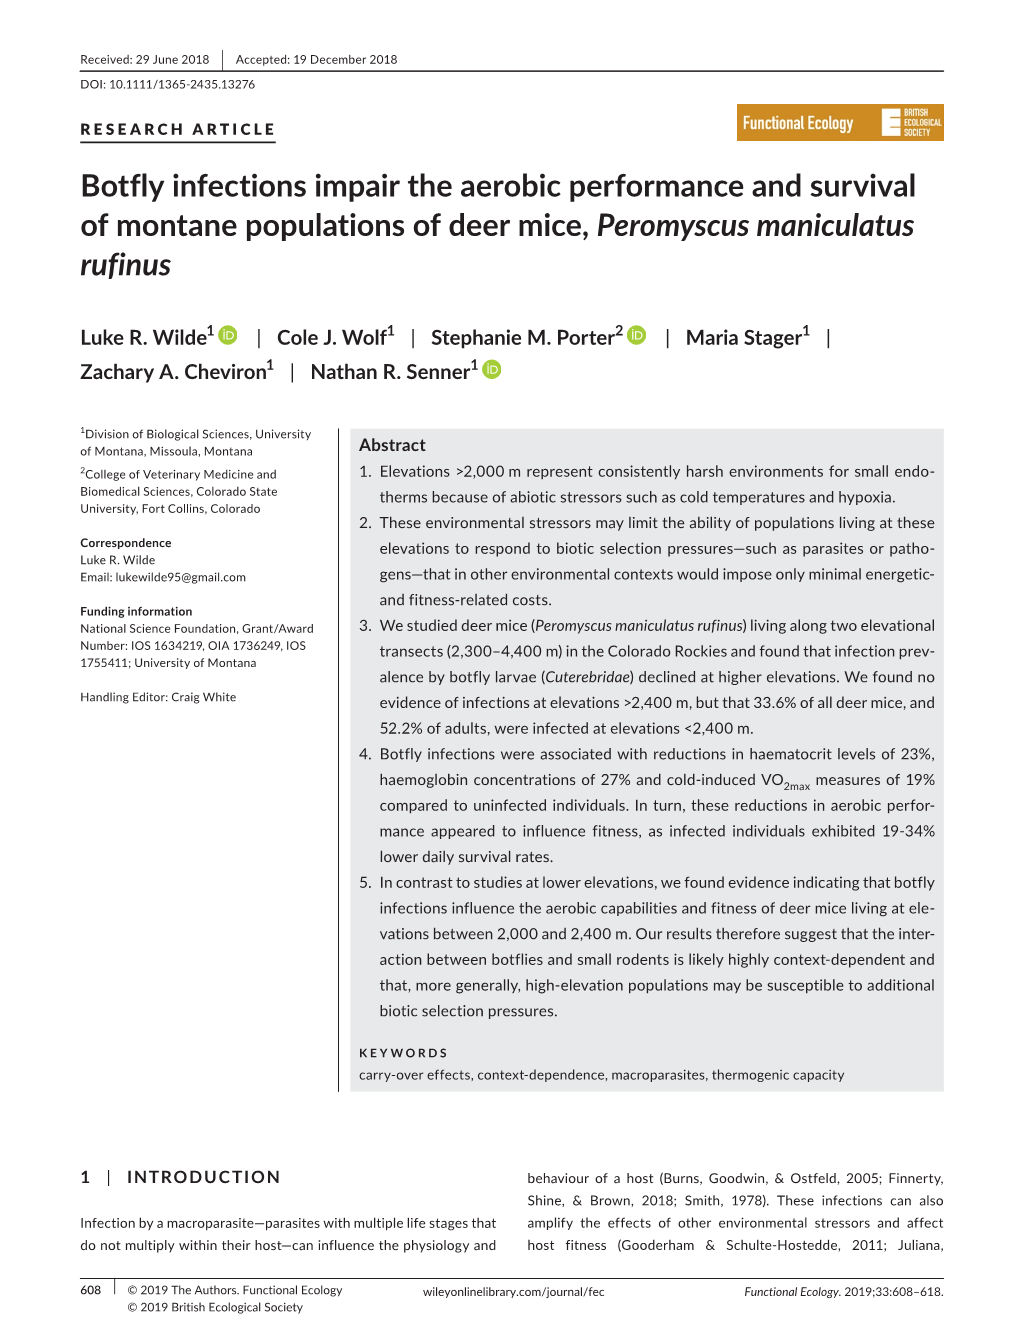 Botfly Infections Impair the Aerobic Performance and Survival of Montane Populations of Deer Mice, Peromyscus Maniculatus Rufinus